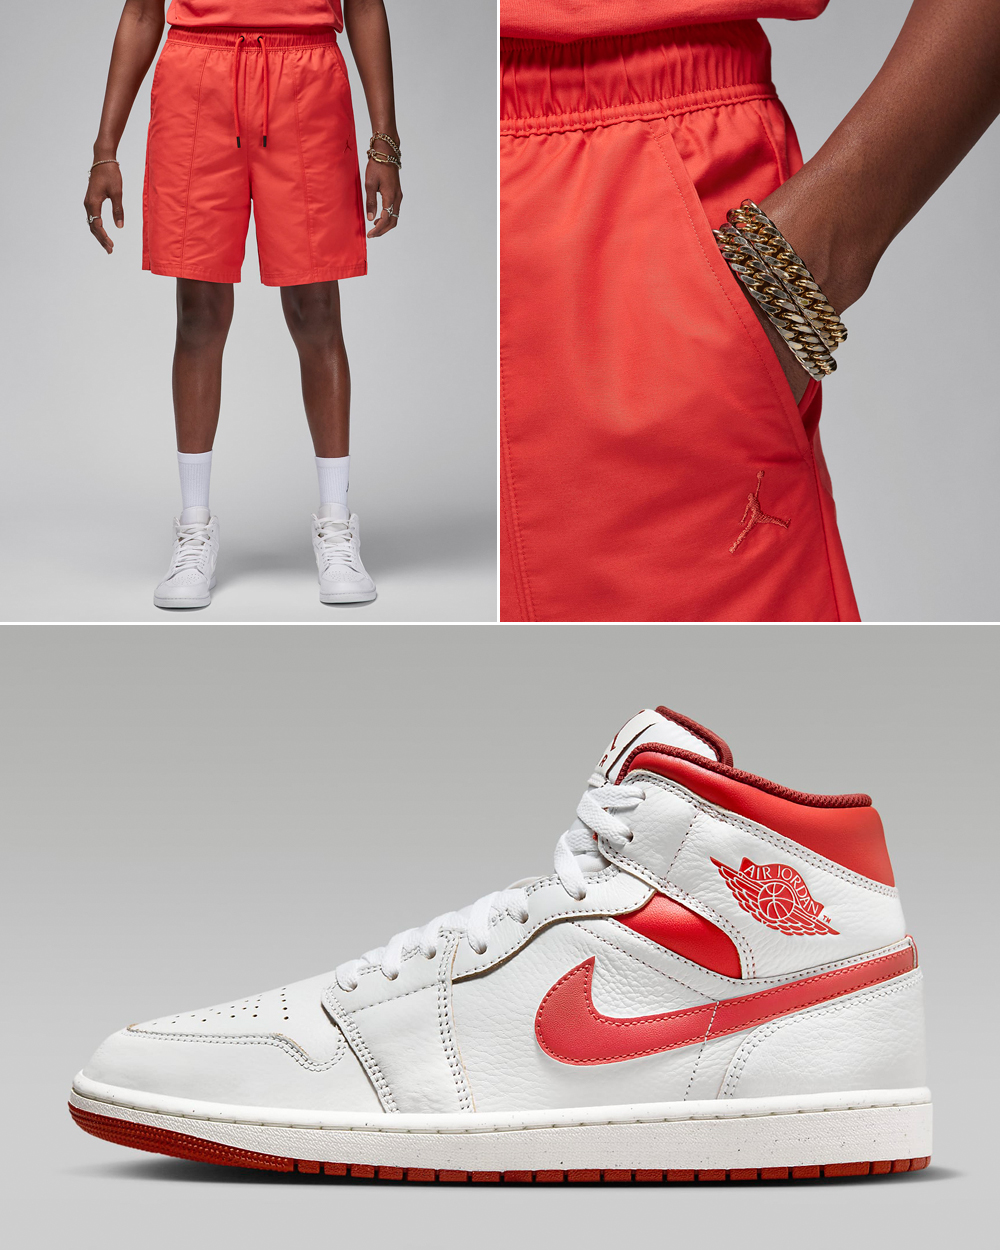 Air-Jordan-1-Mid-SE-White-Dune-Red-Lobster-Shorts-Matching-Outfit